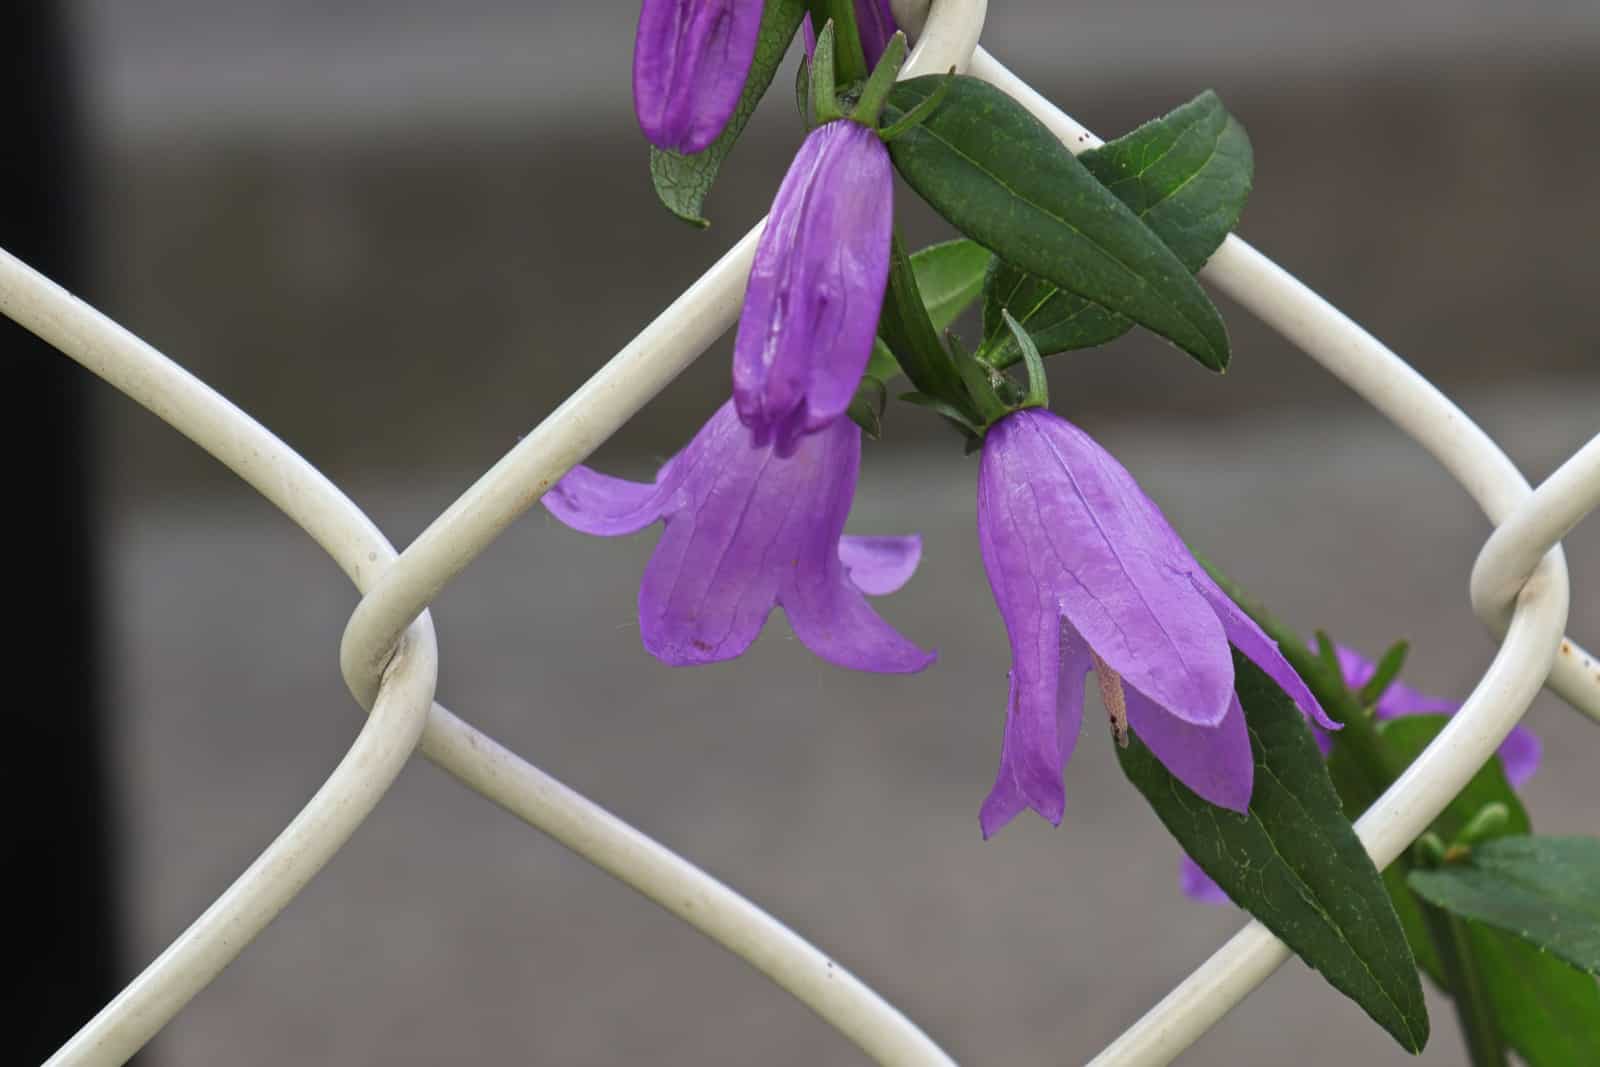 Creeping Bellflower and invasive weed on a fence